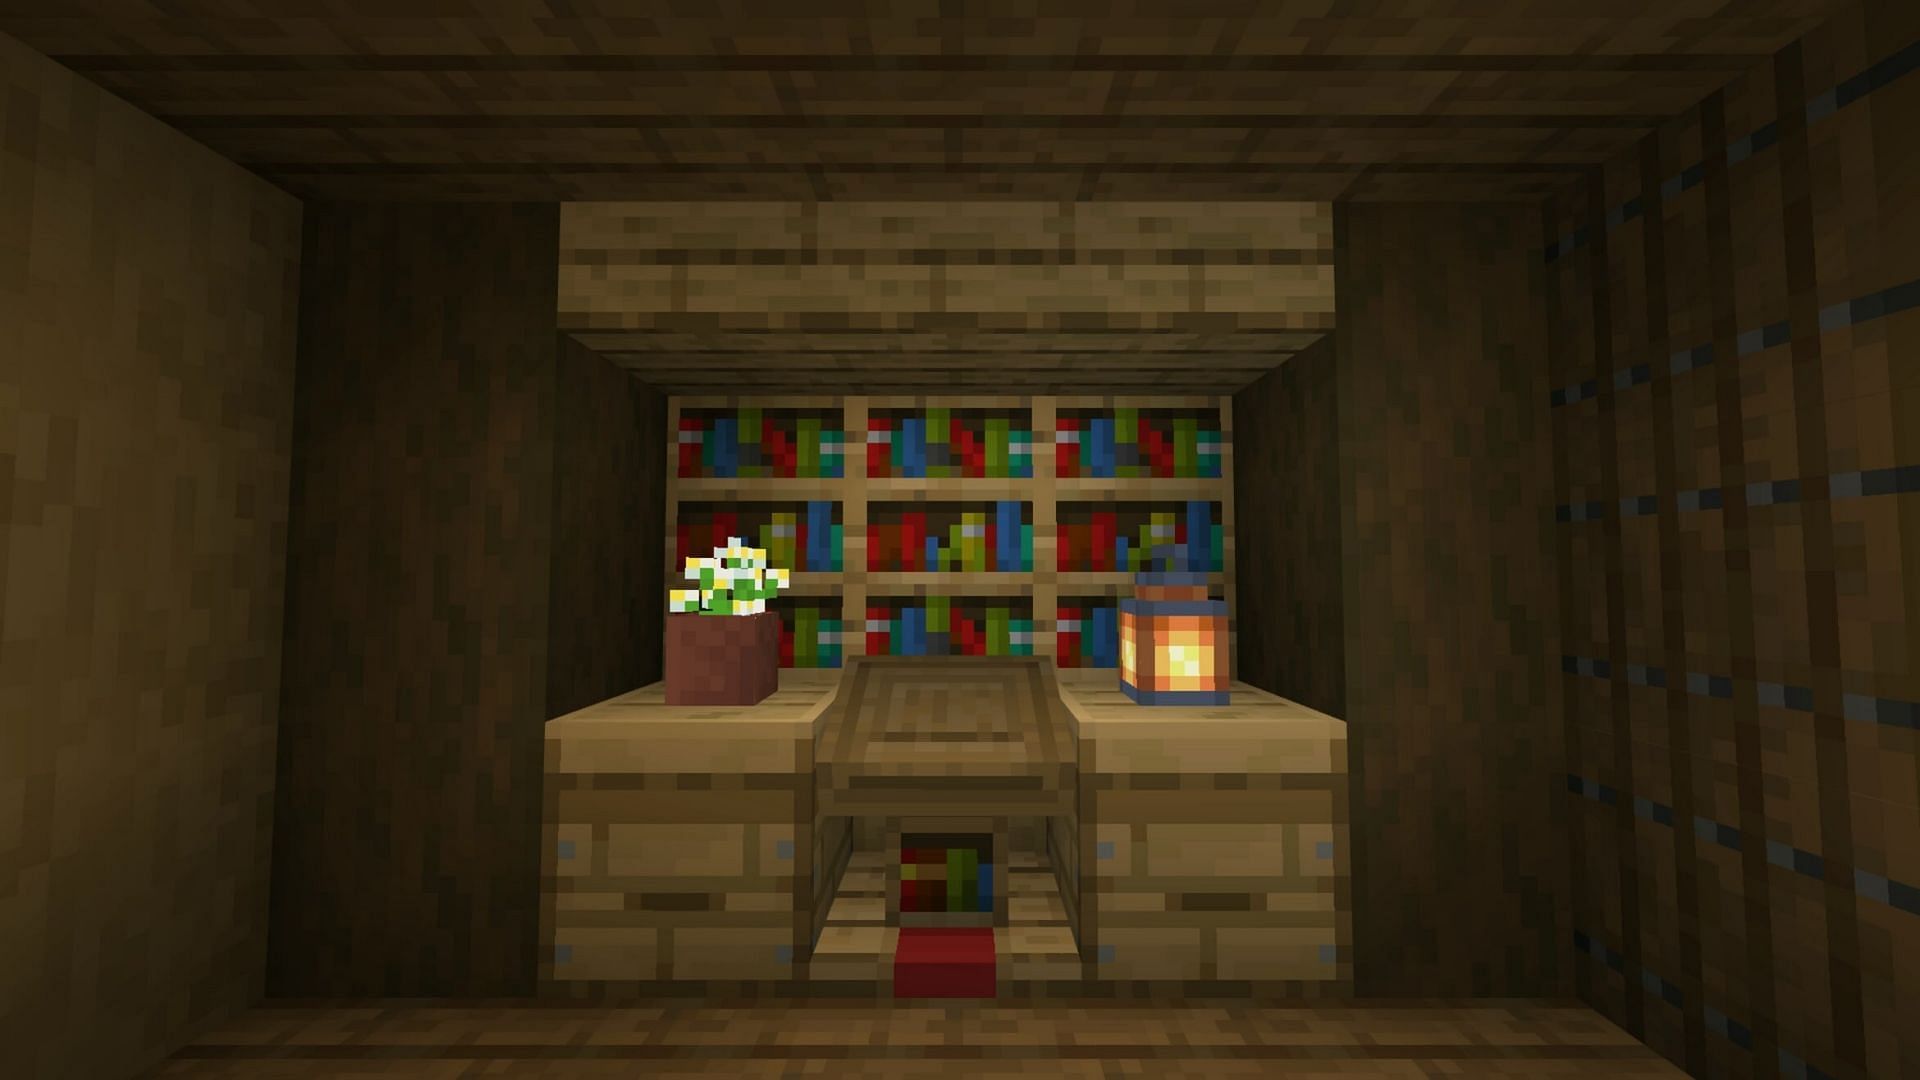 Players can decorate their Minecraft base interior by creating a custom bookshelf area (Image via Reddit/u/MercifulTiger21)